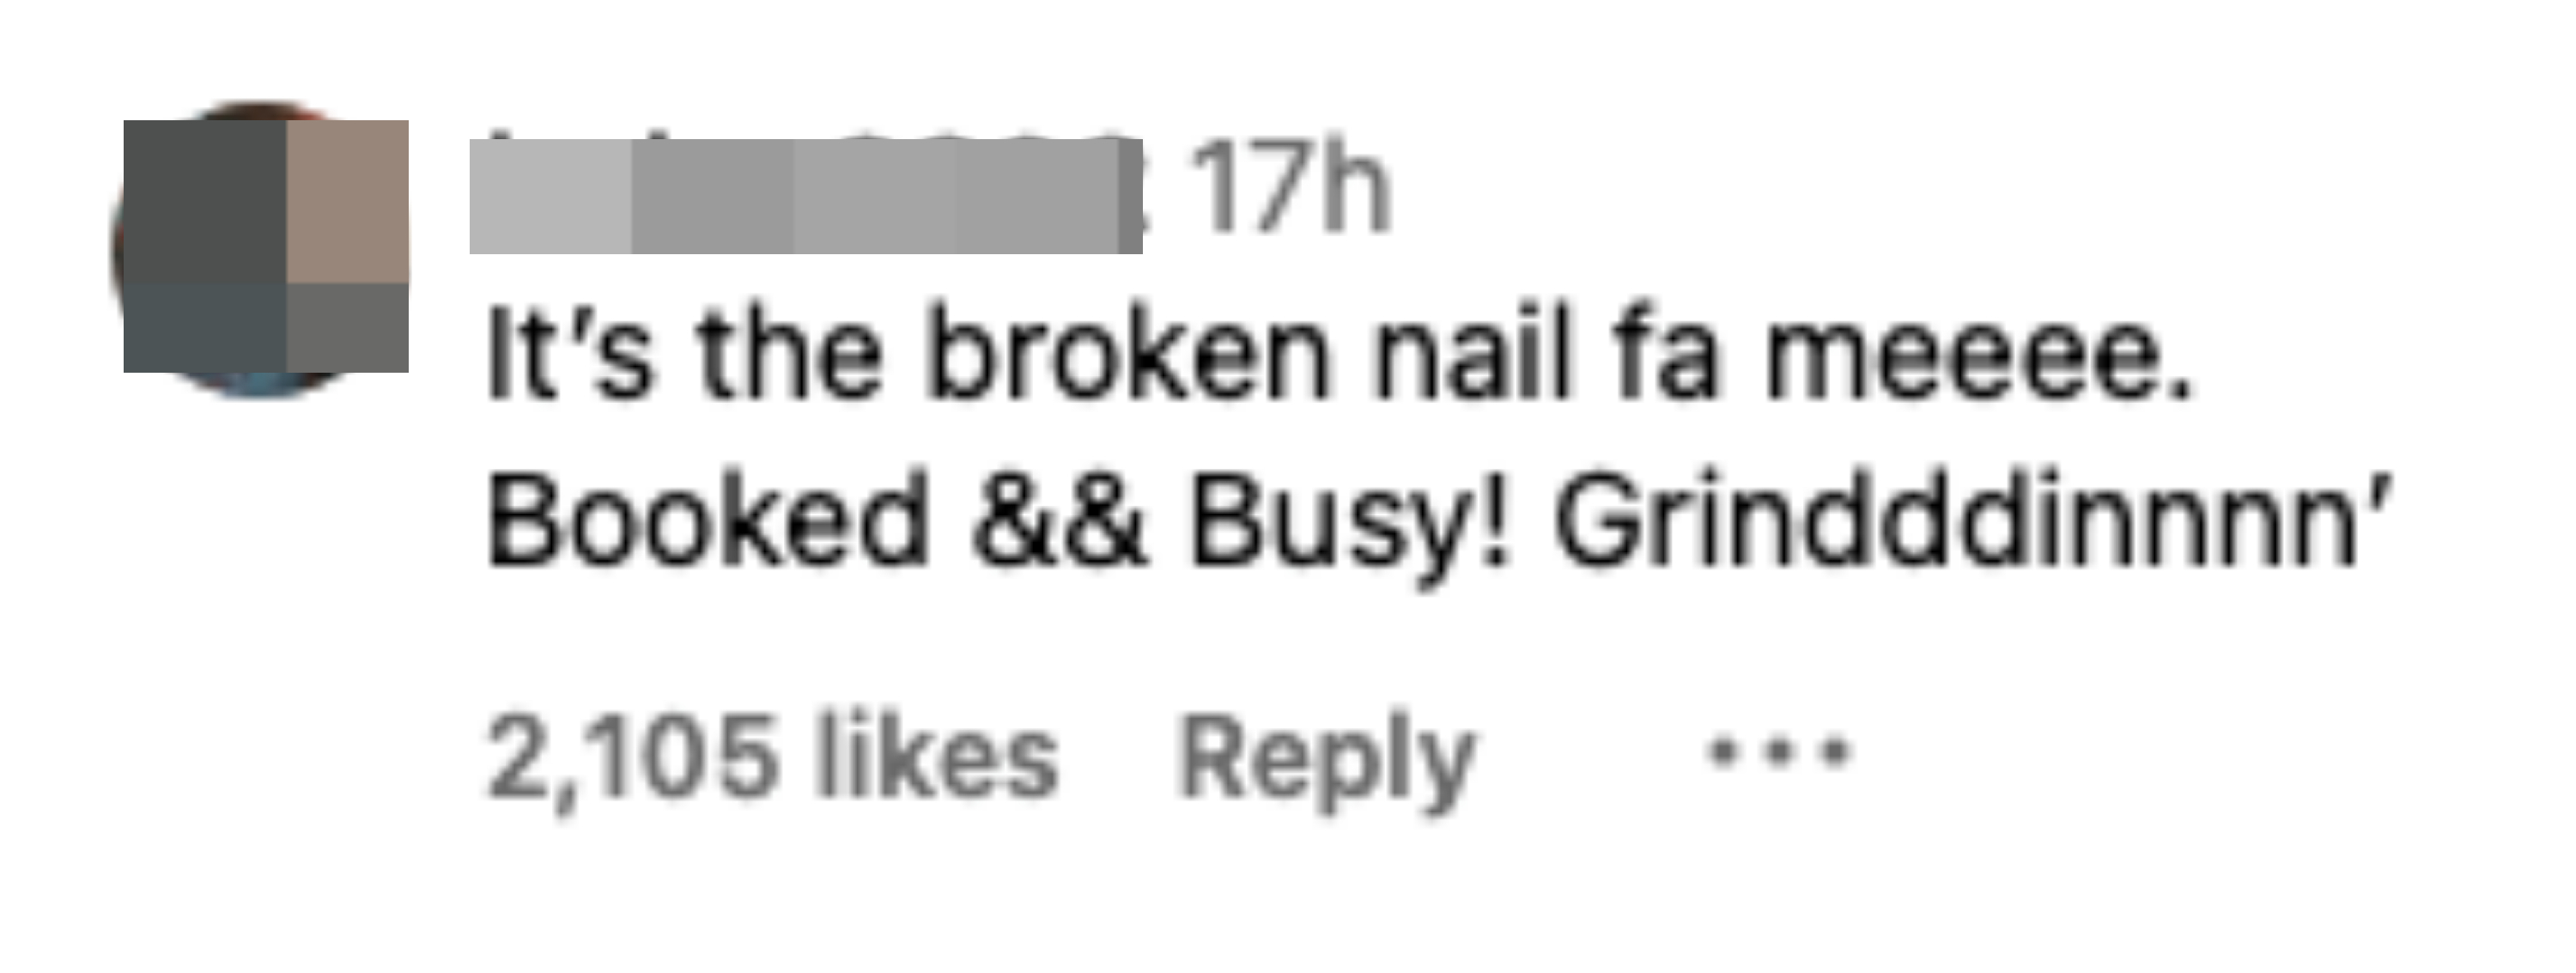 It’s the broken nail for me. Booked and busy